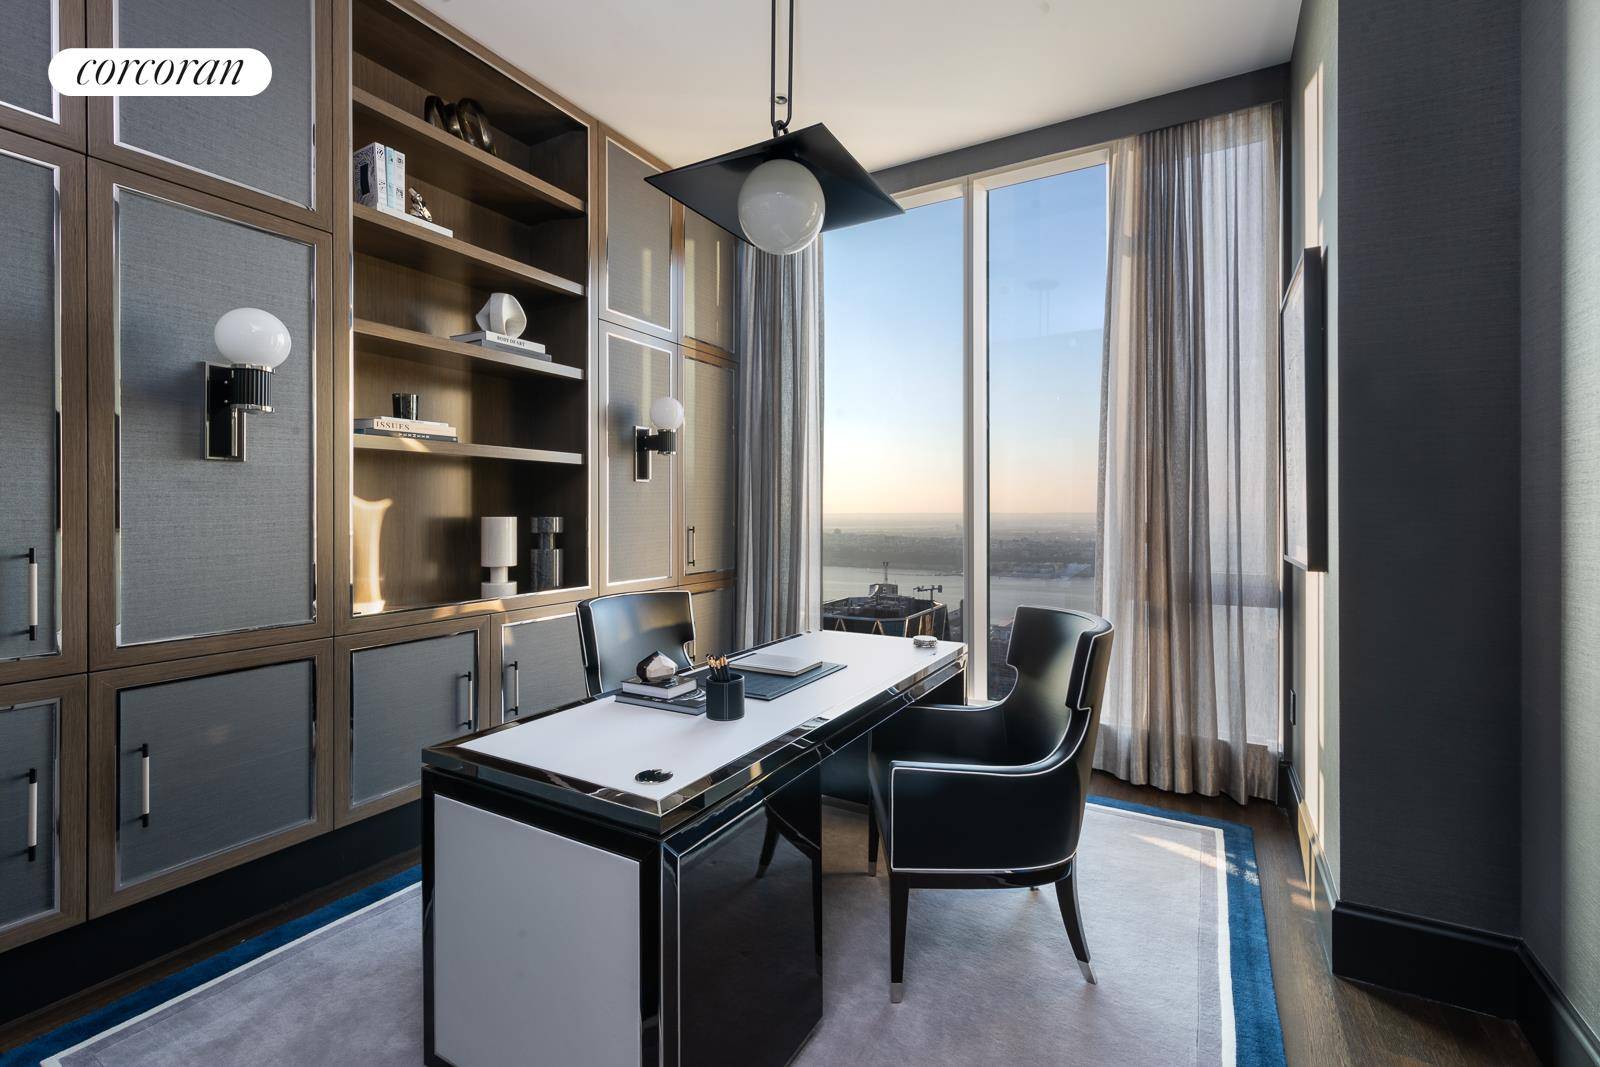 Reside over 600' above New York City in this residence at Central Park Tower.